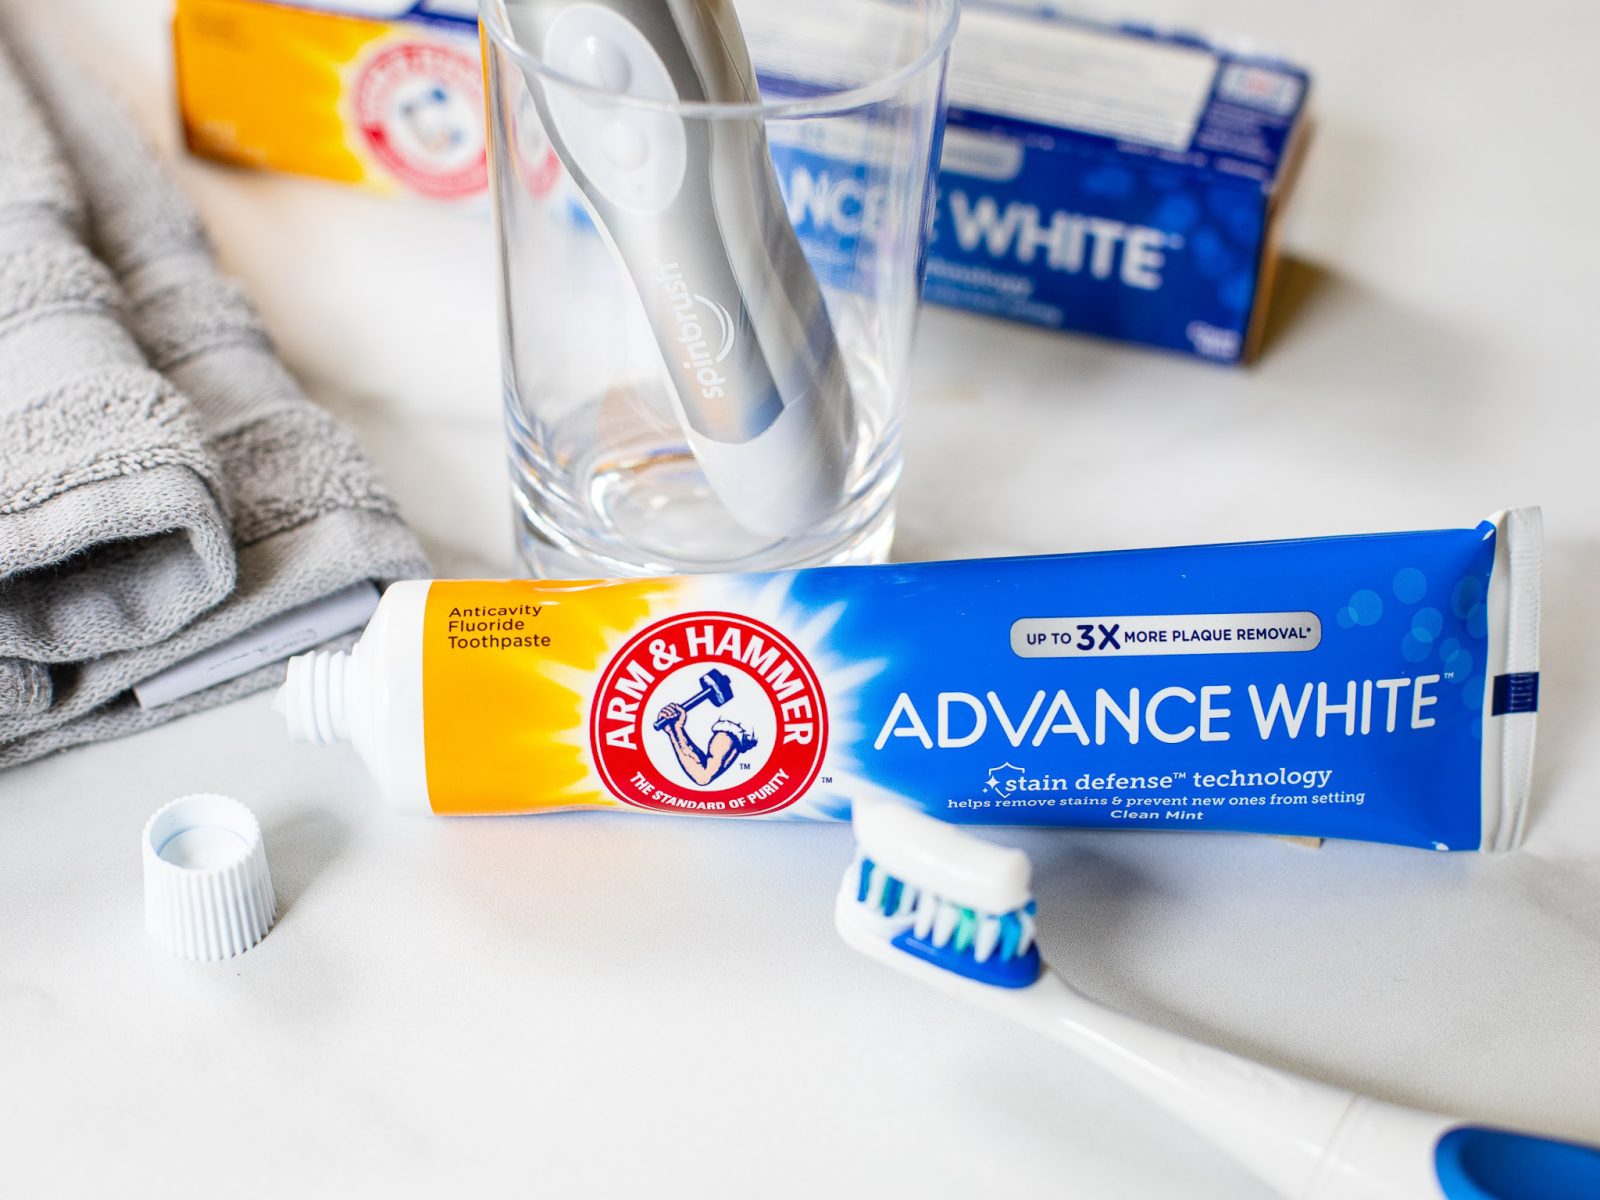 Arm & Hammer Toothpaste Just 81¢ At Publix